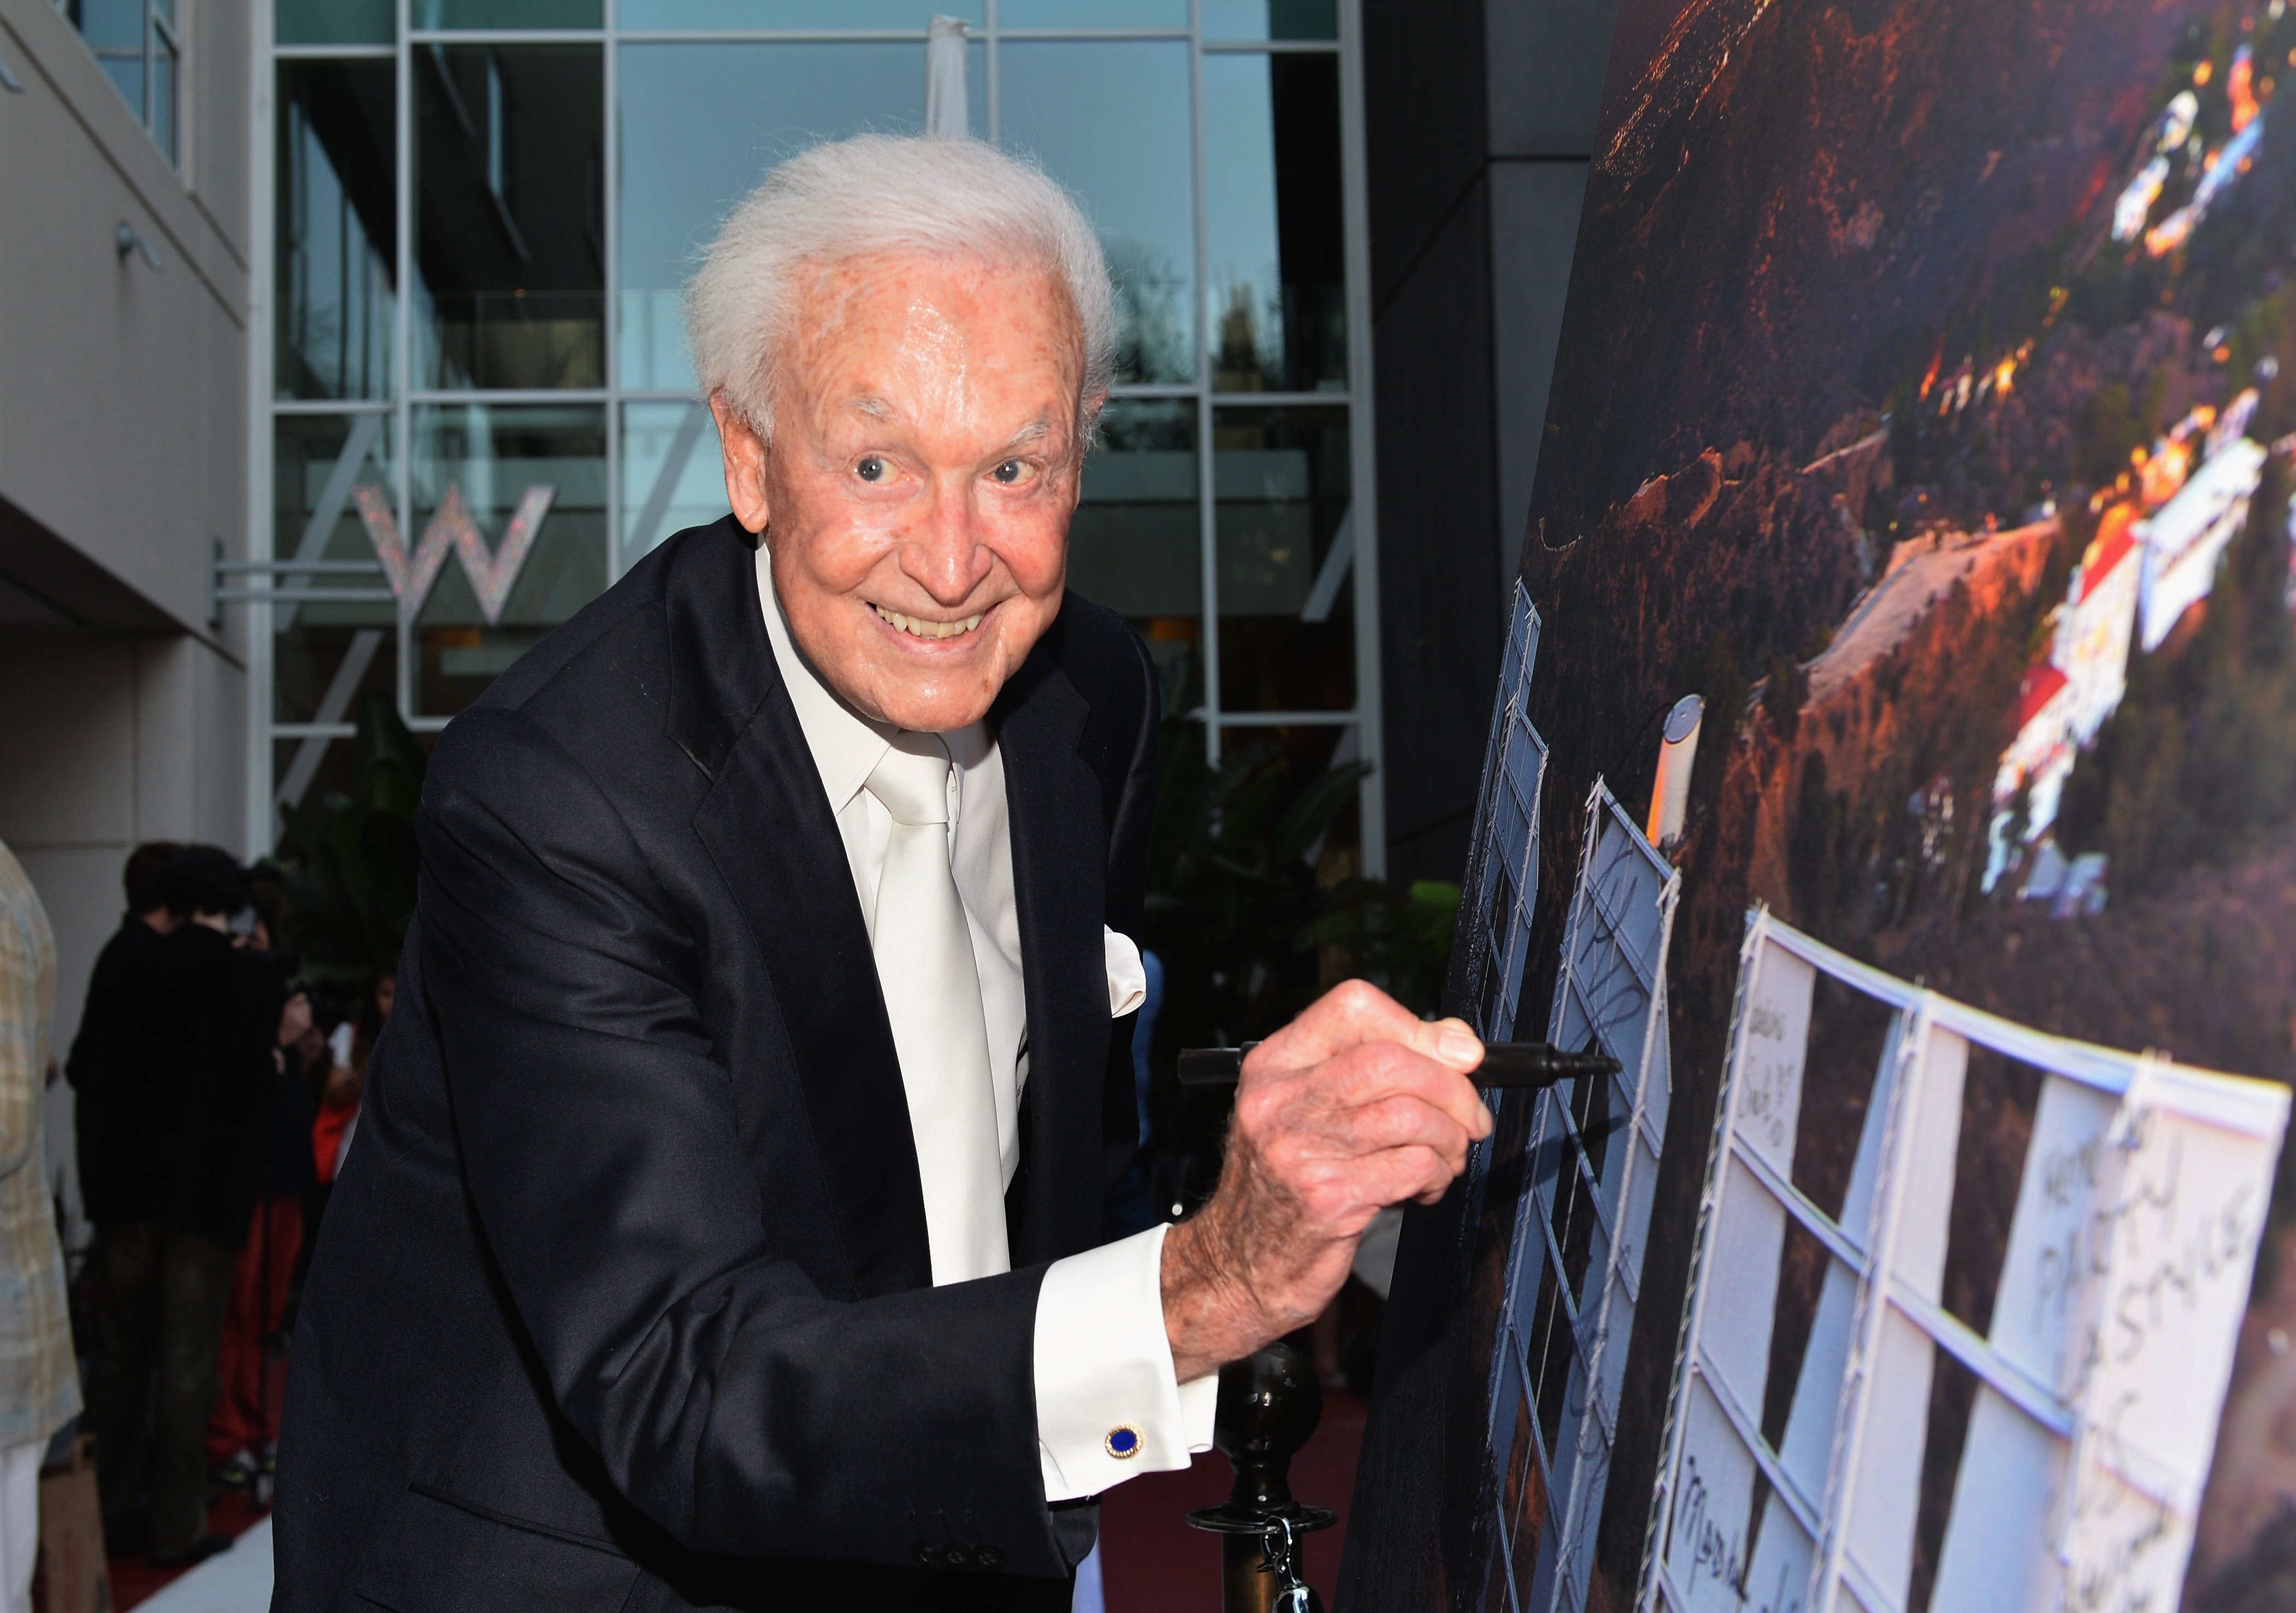 Bob Barker attends The Hollywood Chamber of Commerce & The Hollywood Sign Trust's 90th Celebration of the Hollywood Sign at Drai's Hollywood on September 19, 2013, in Hollywood, California | Source: Getty Images